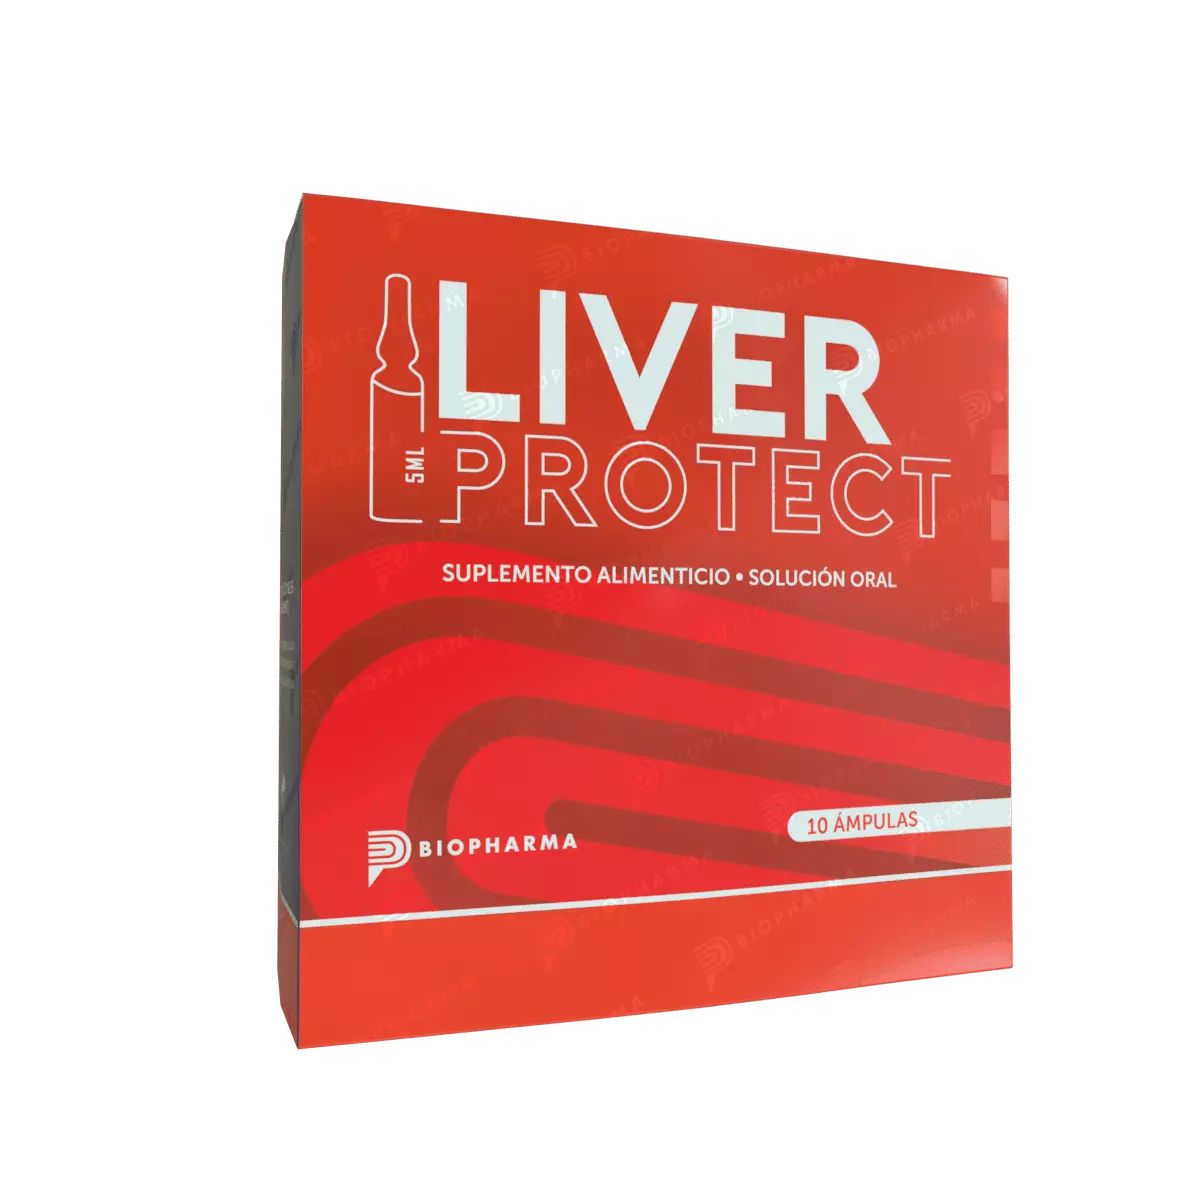 Liver Protect